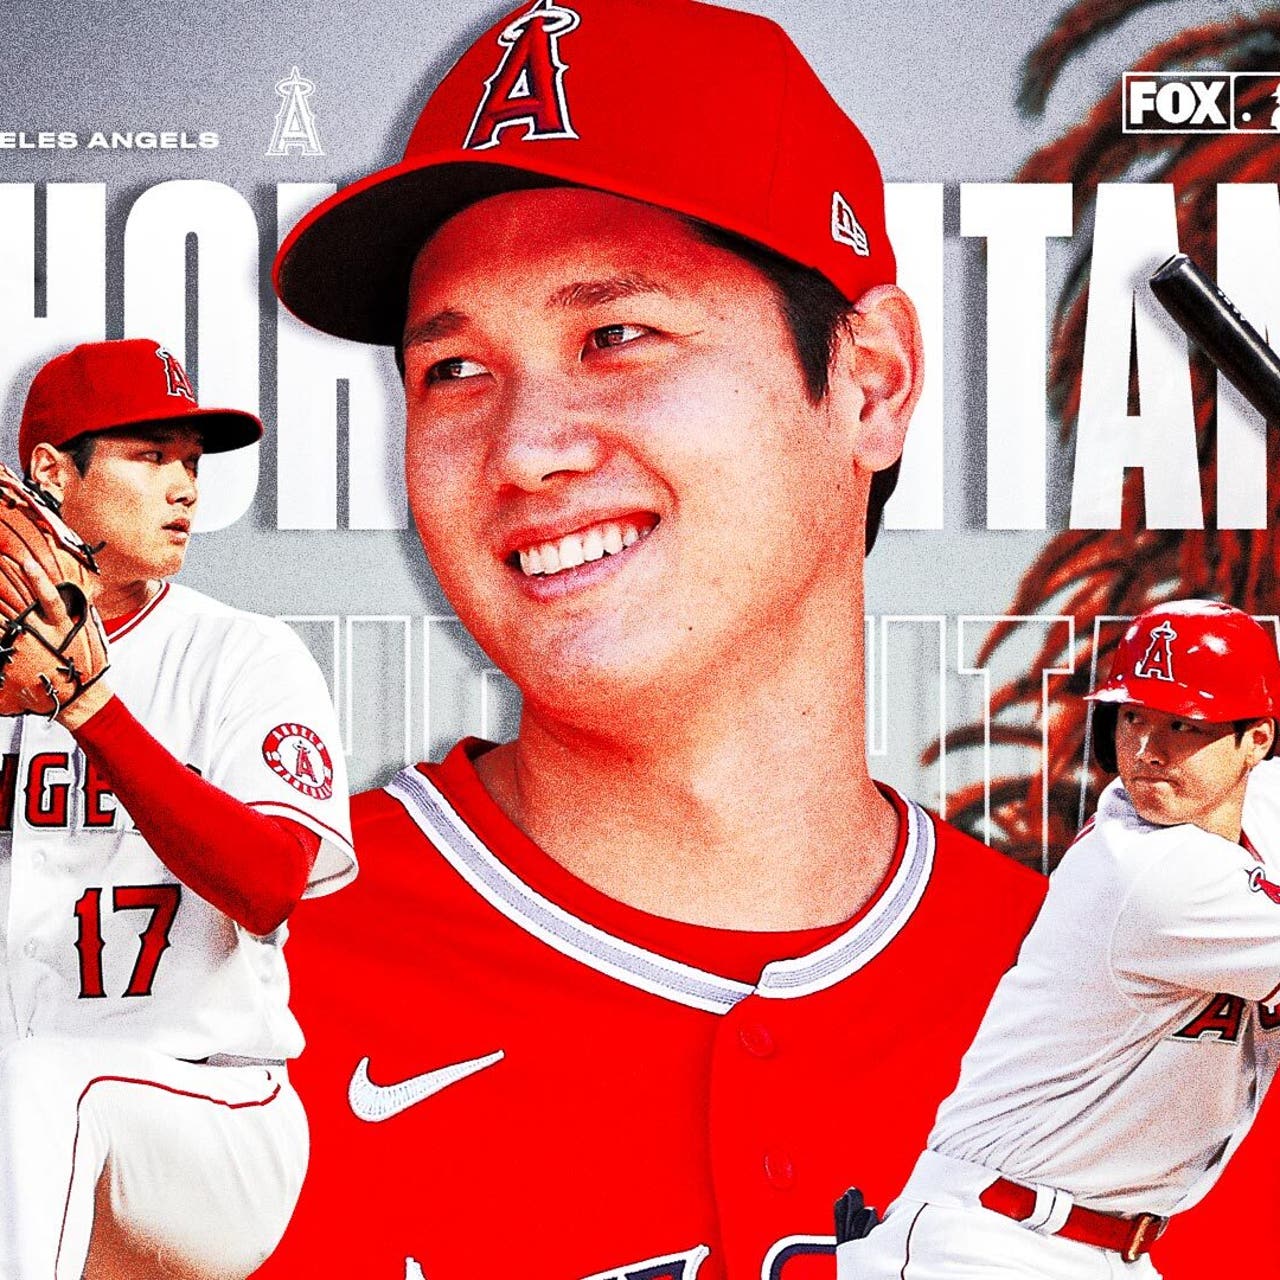 Shohei Ohtani a big draw at Angels spring training, especially for